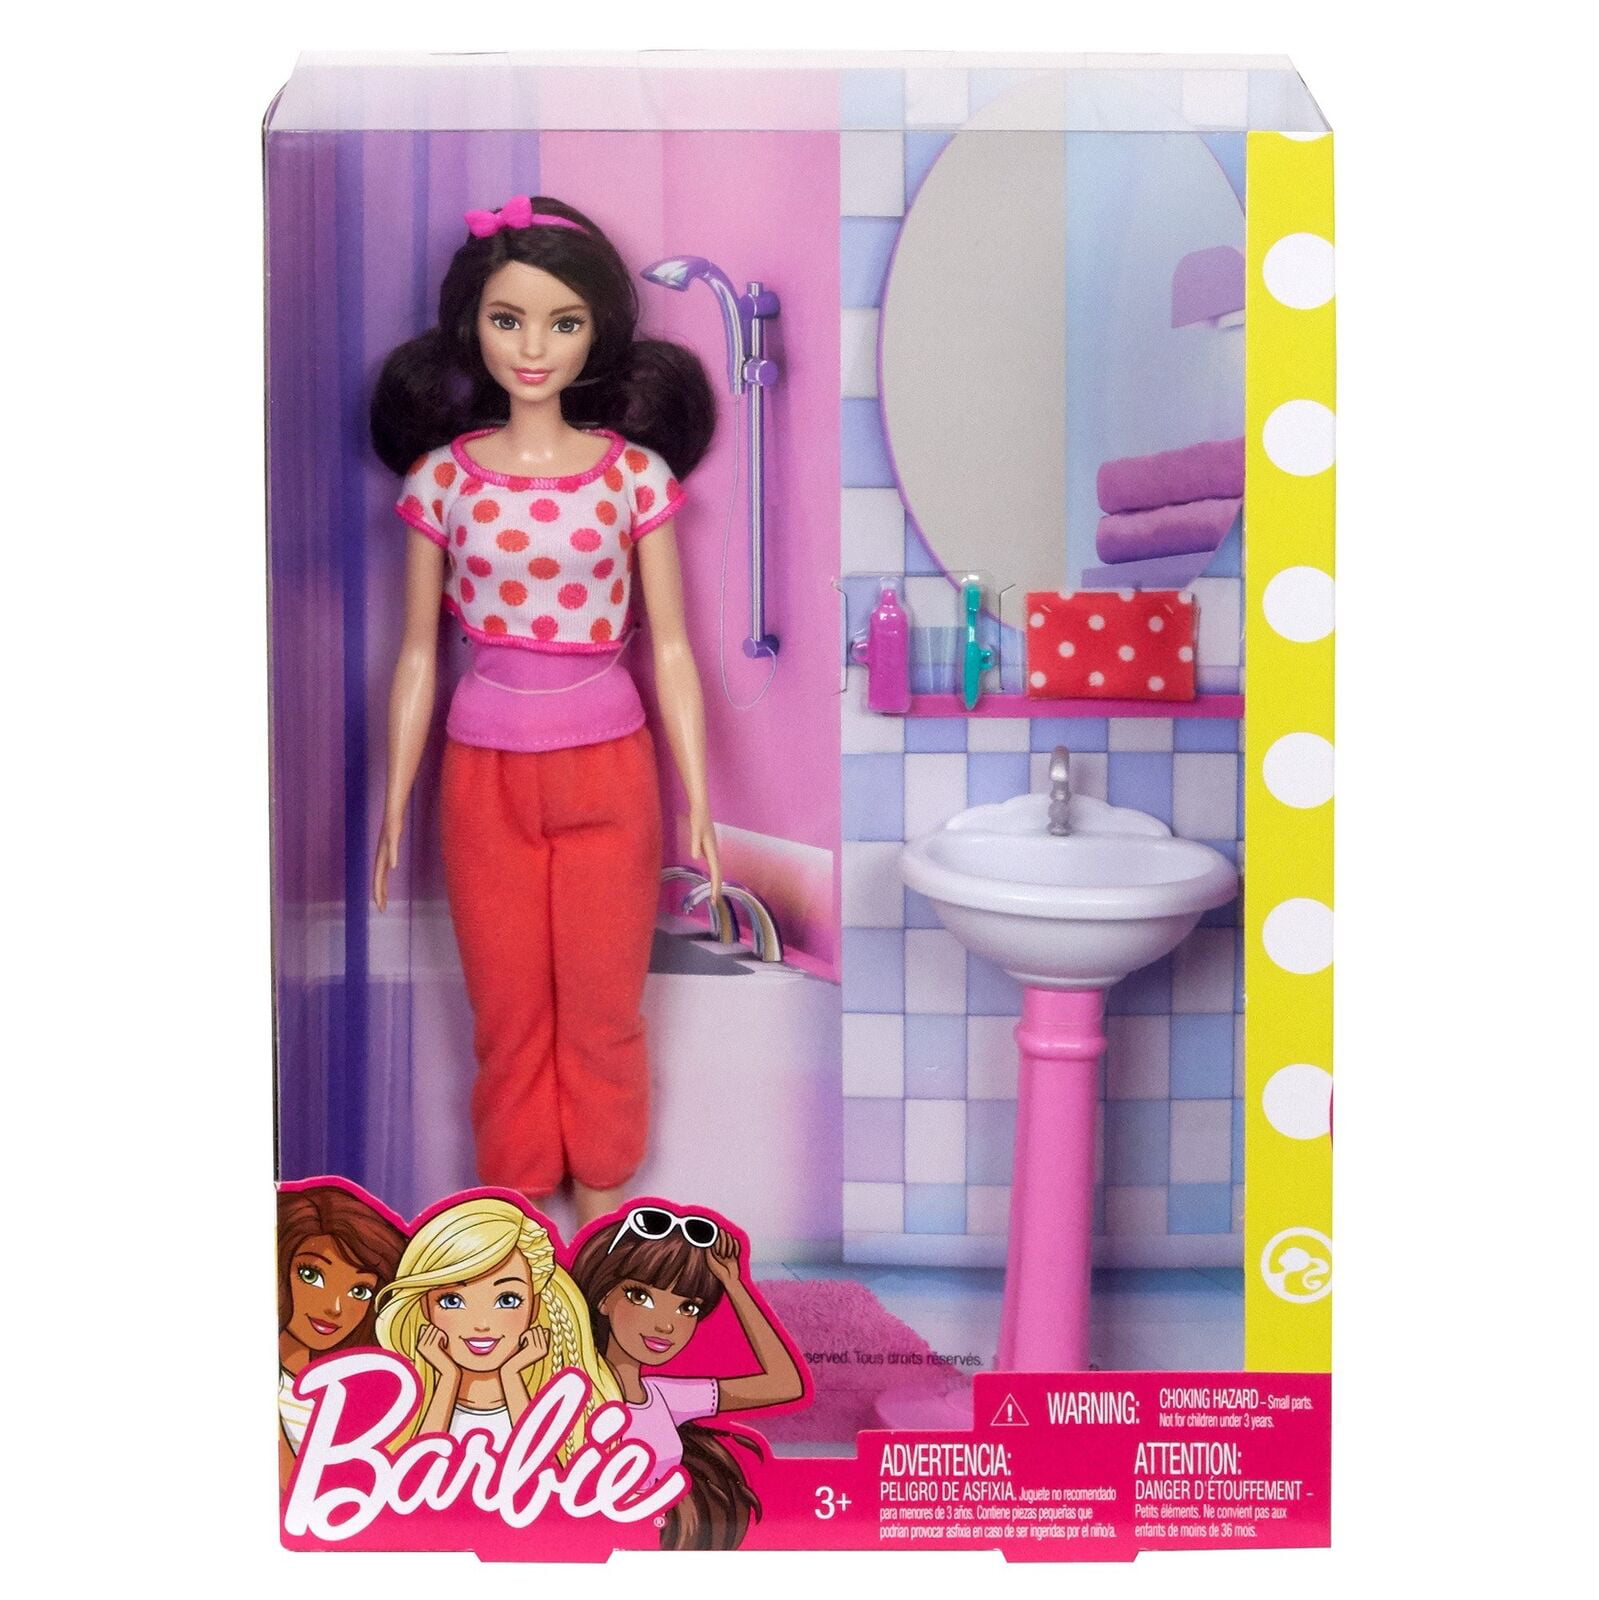 Details about   2016 Barbie Teresa Bath-time “You Can Be Anything You Want Barbie” BATHTUB SINK 